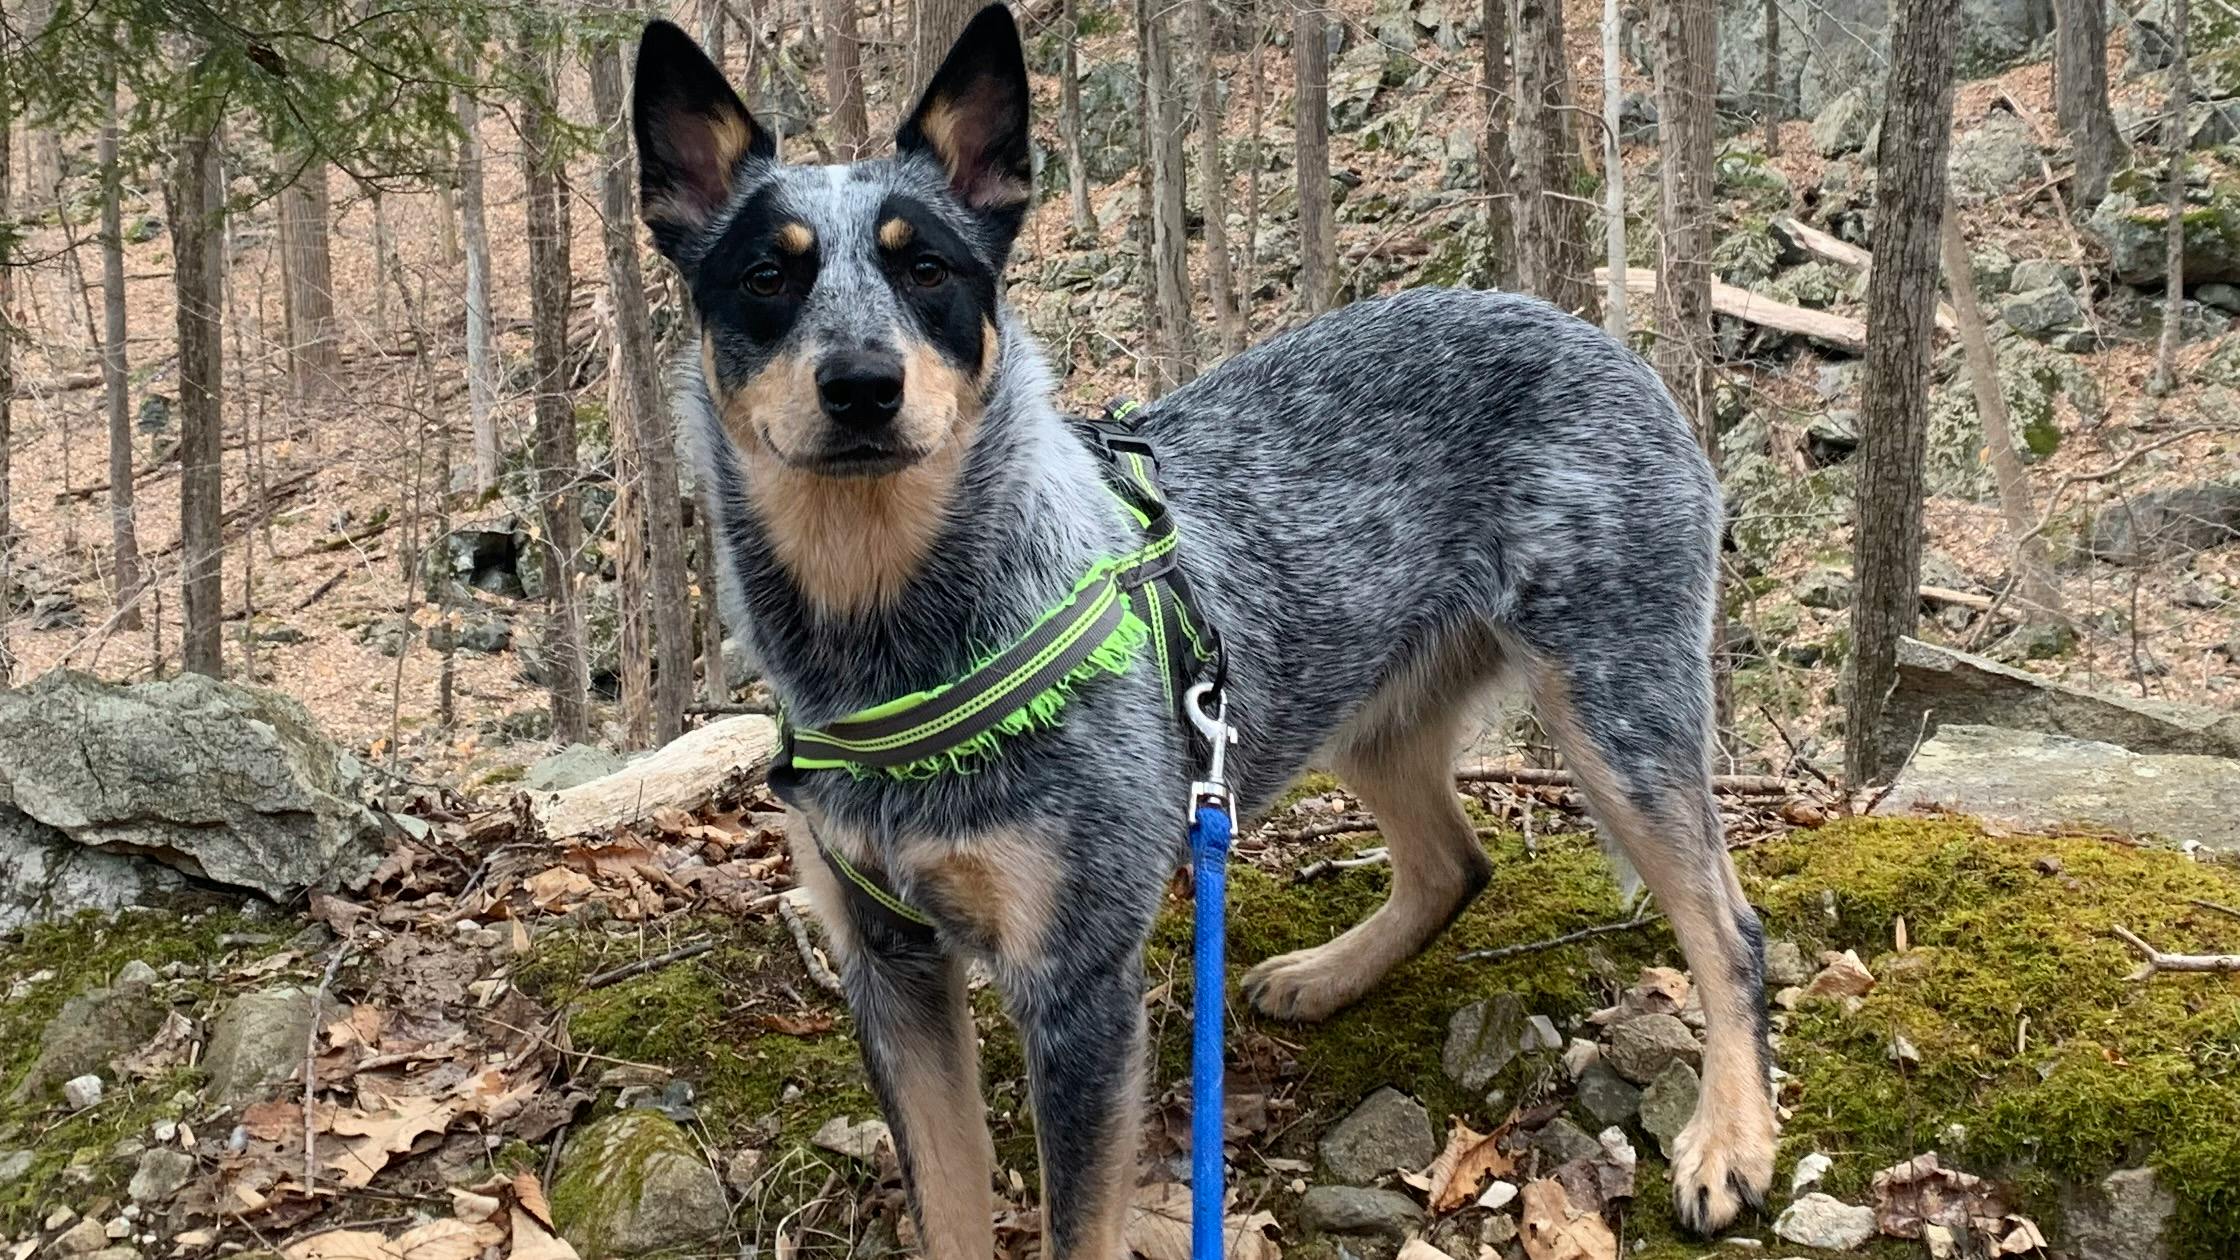 An Australian cattle dog stands on a pile of rocks in a wooded area